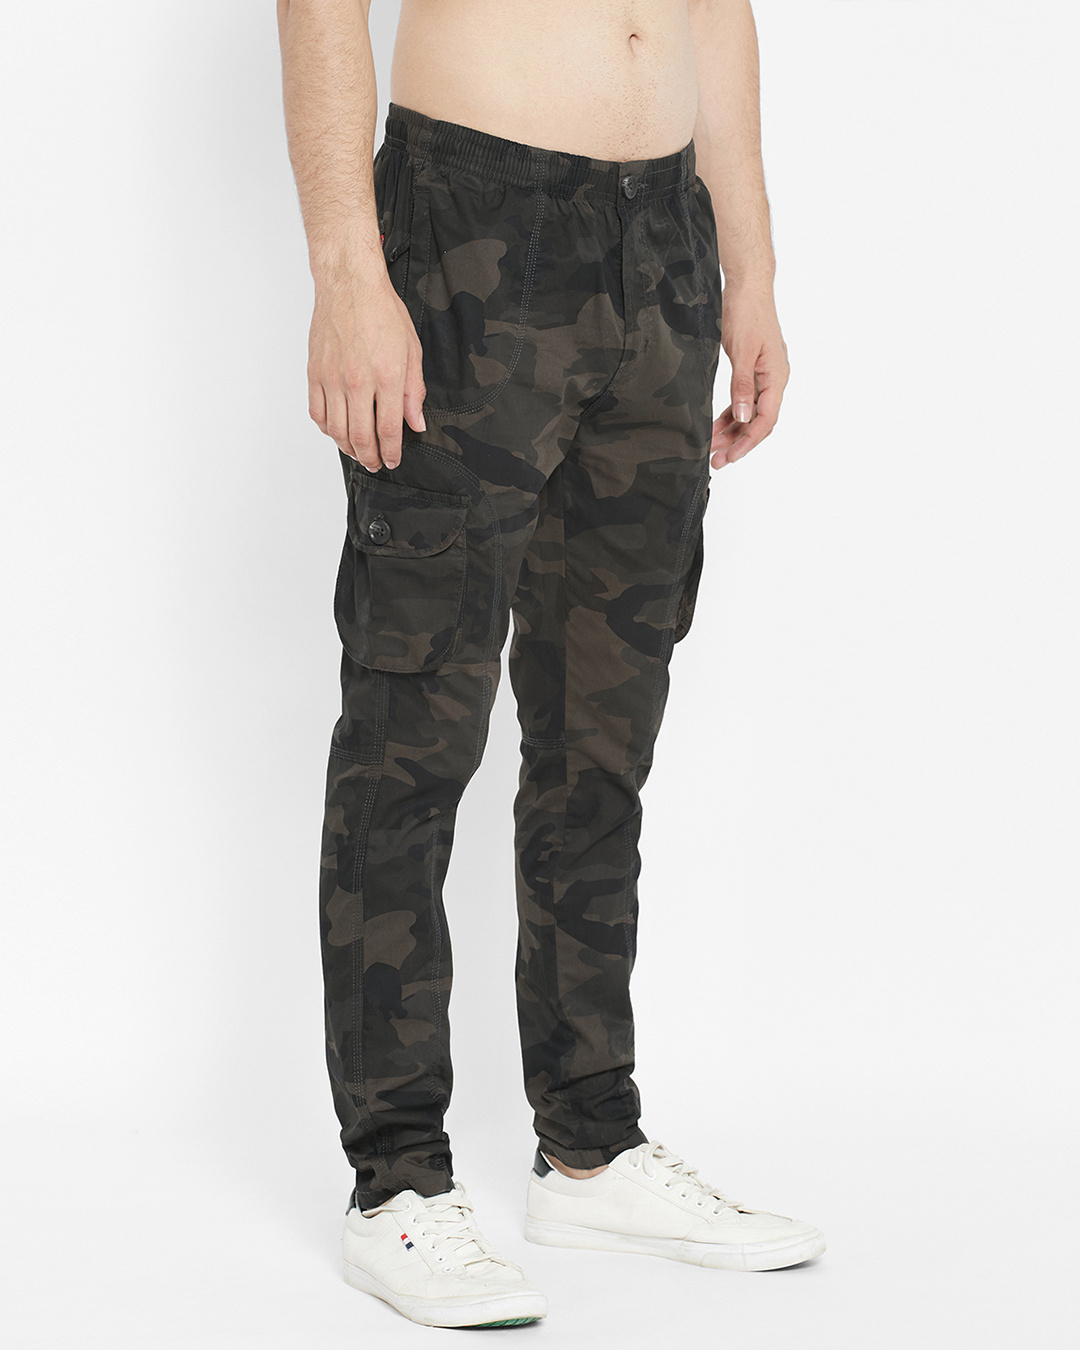 Boys Cargo Trousers | Boys Trousers | Mens Camo Cargo Pants – Gear Outlet